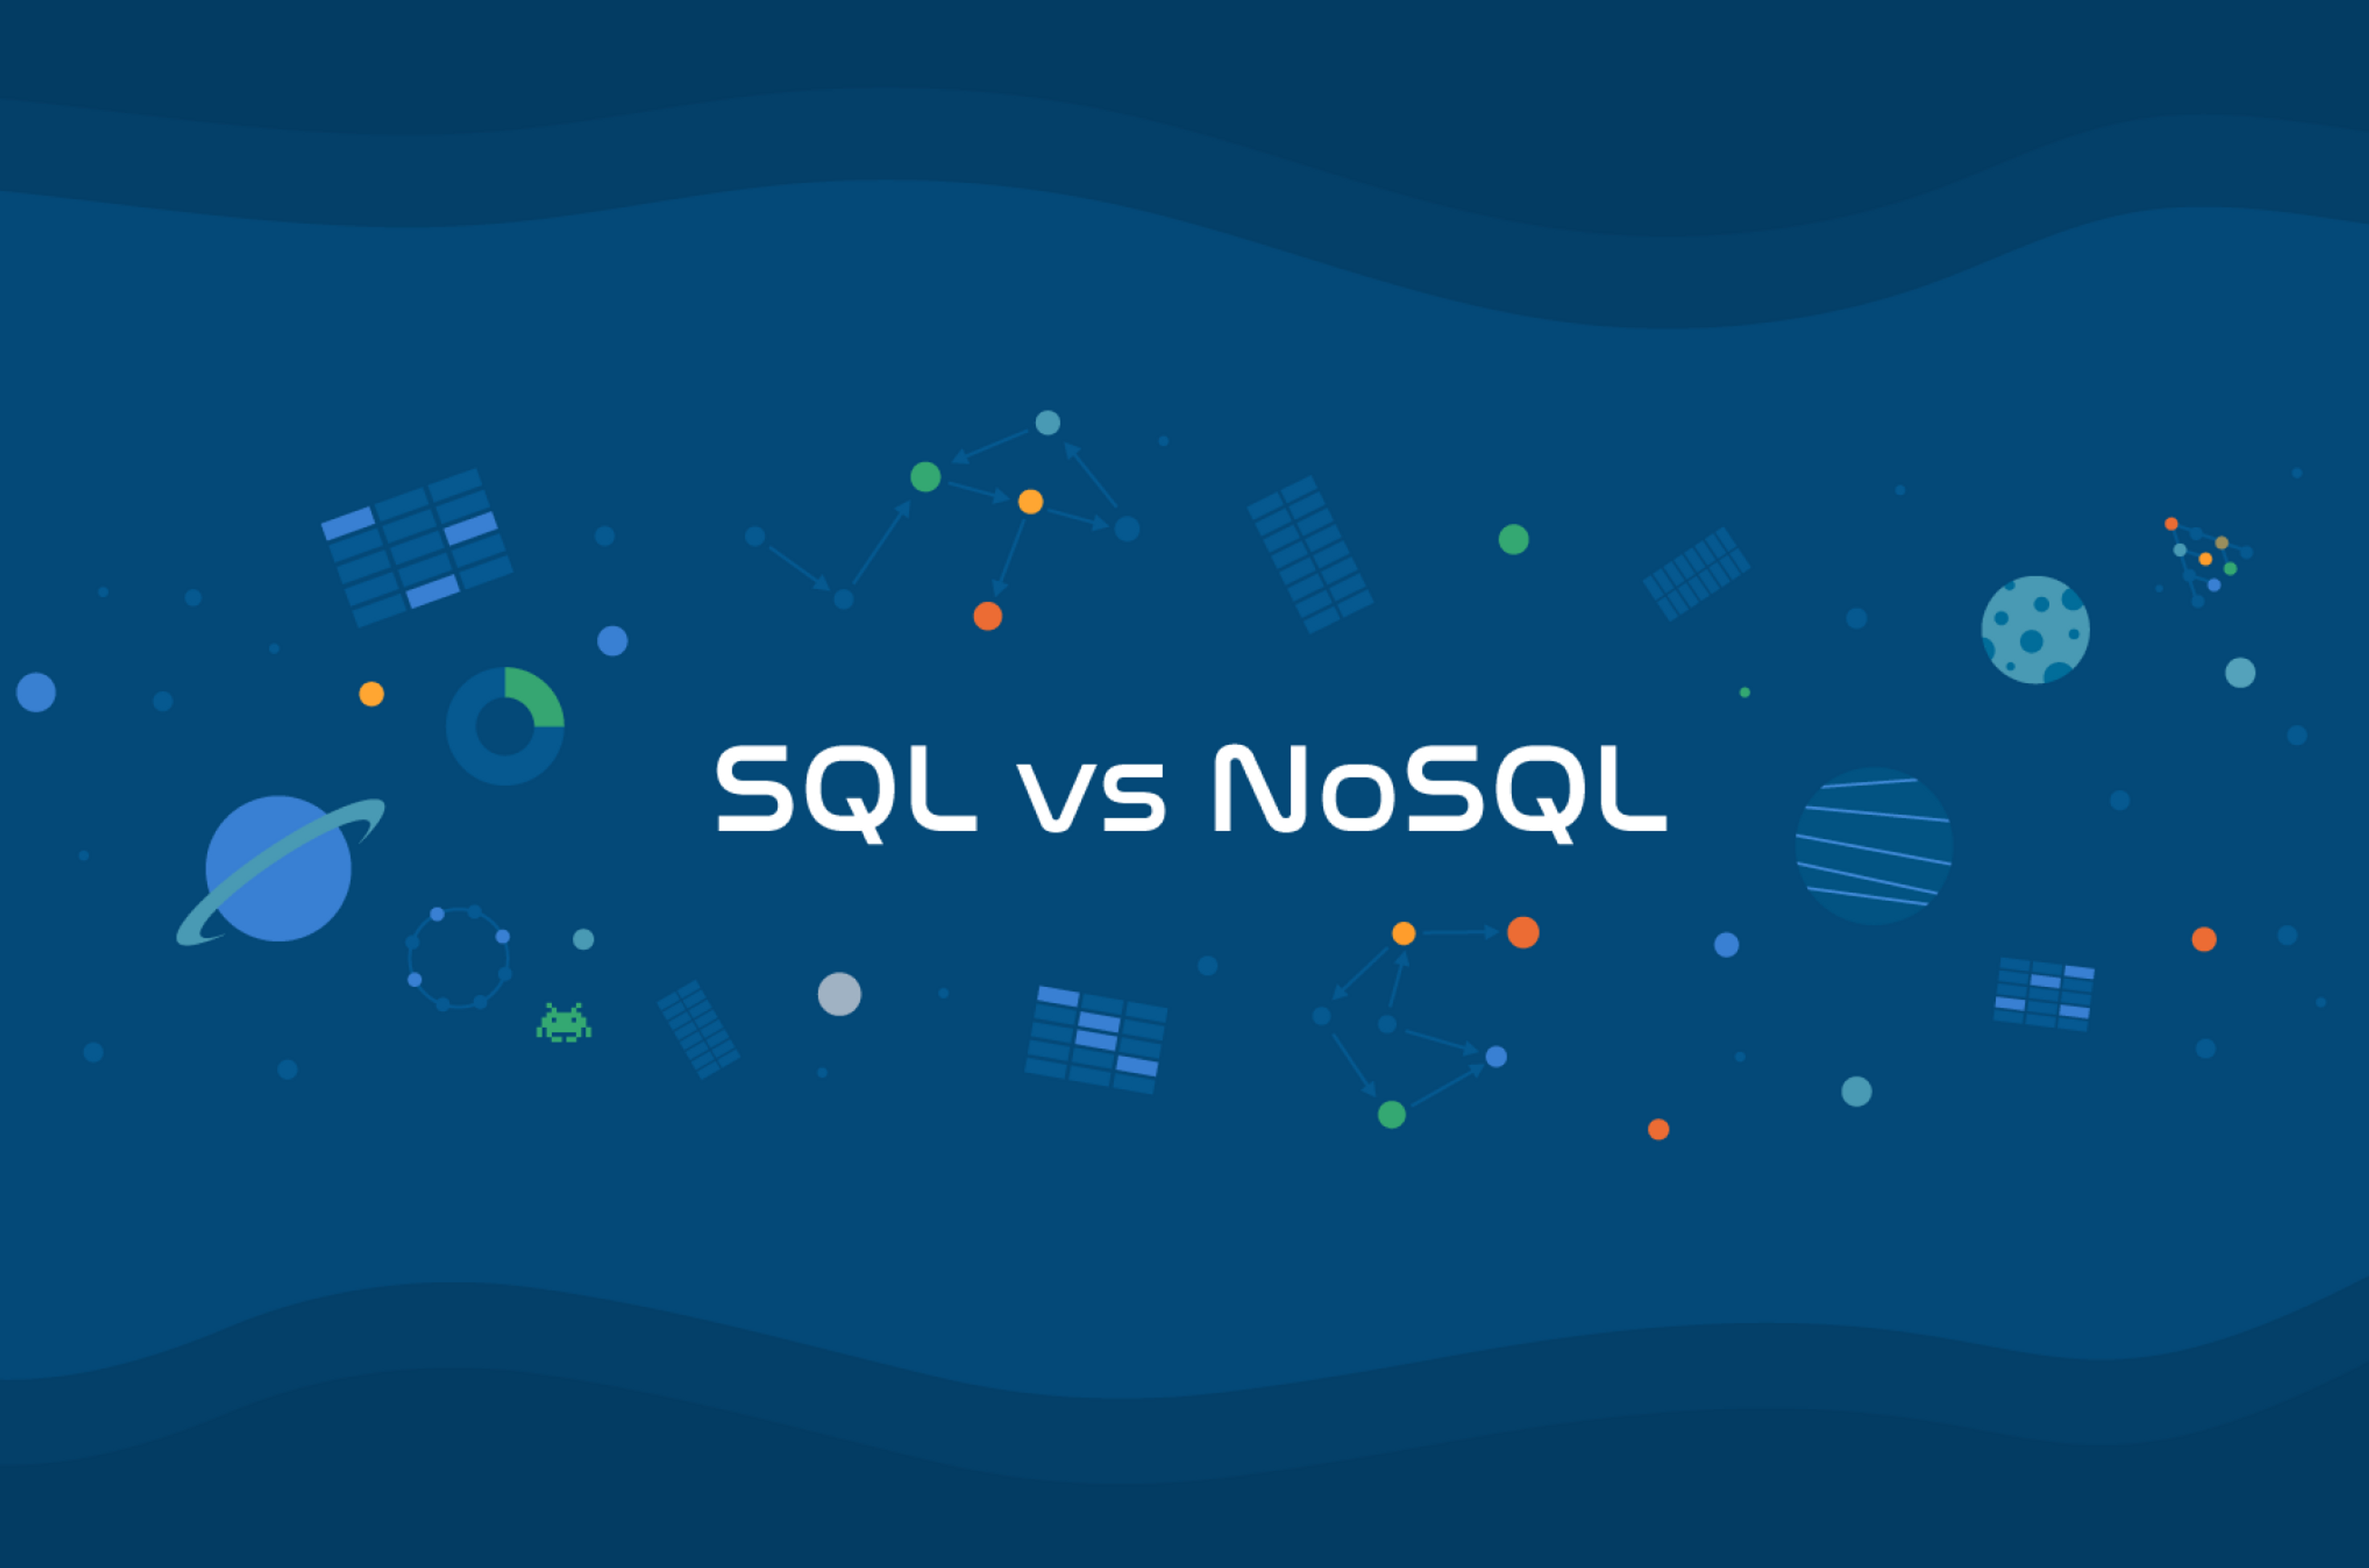 SQL versus NoSQL: Pros and Cons